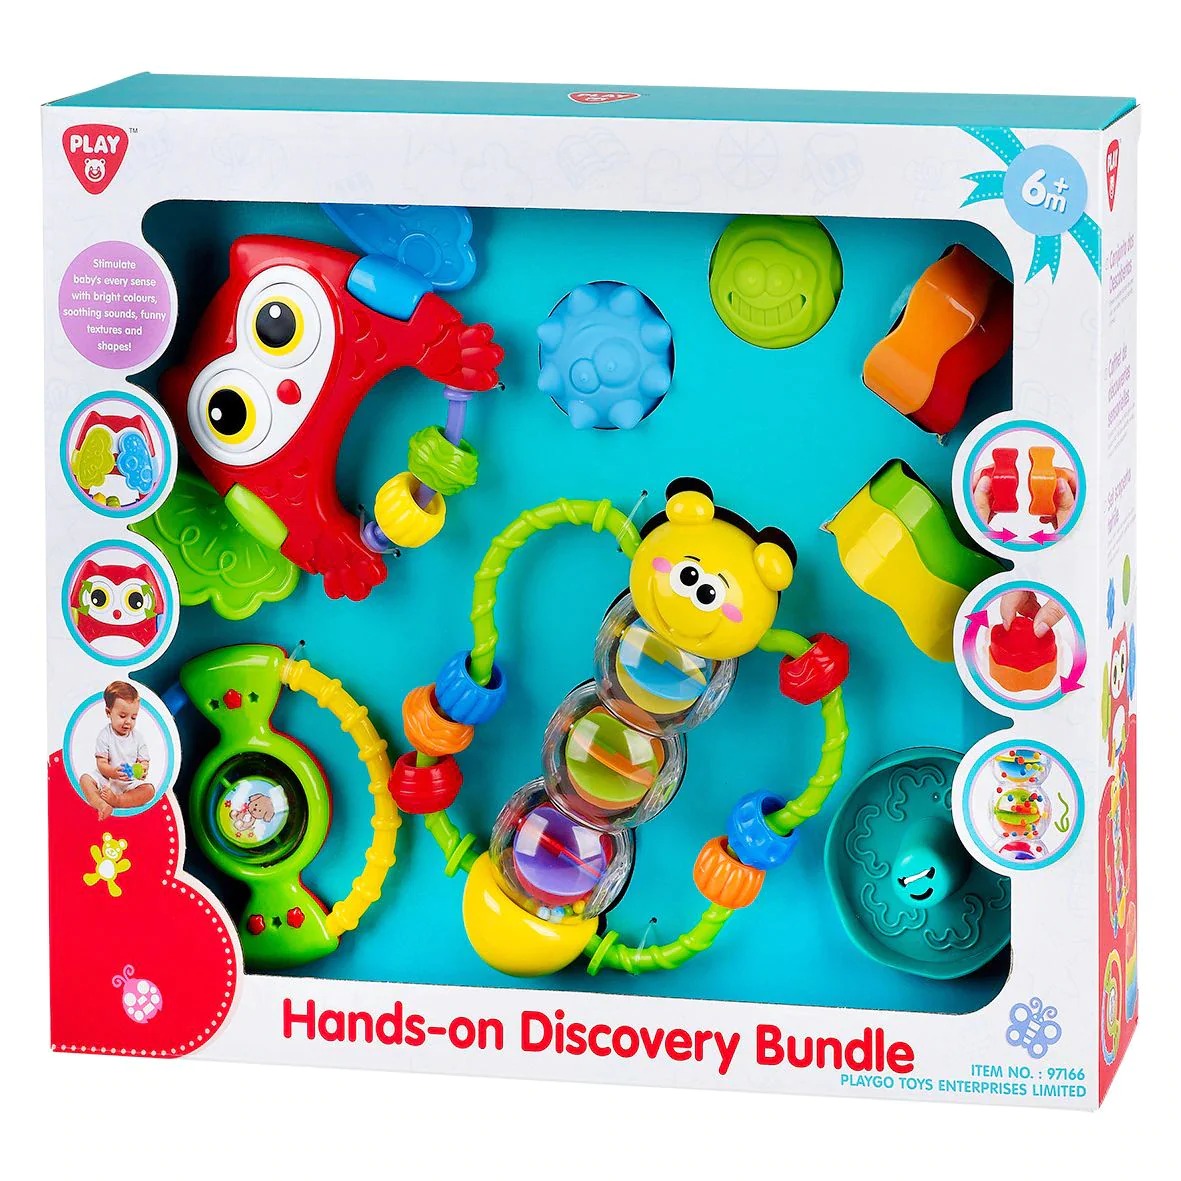 HANDS ON DISCOVERY BUNDLE